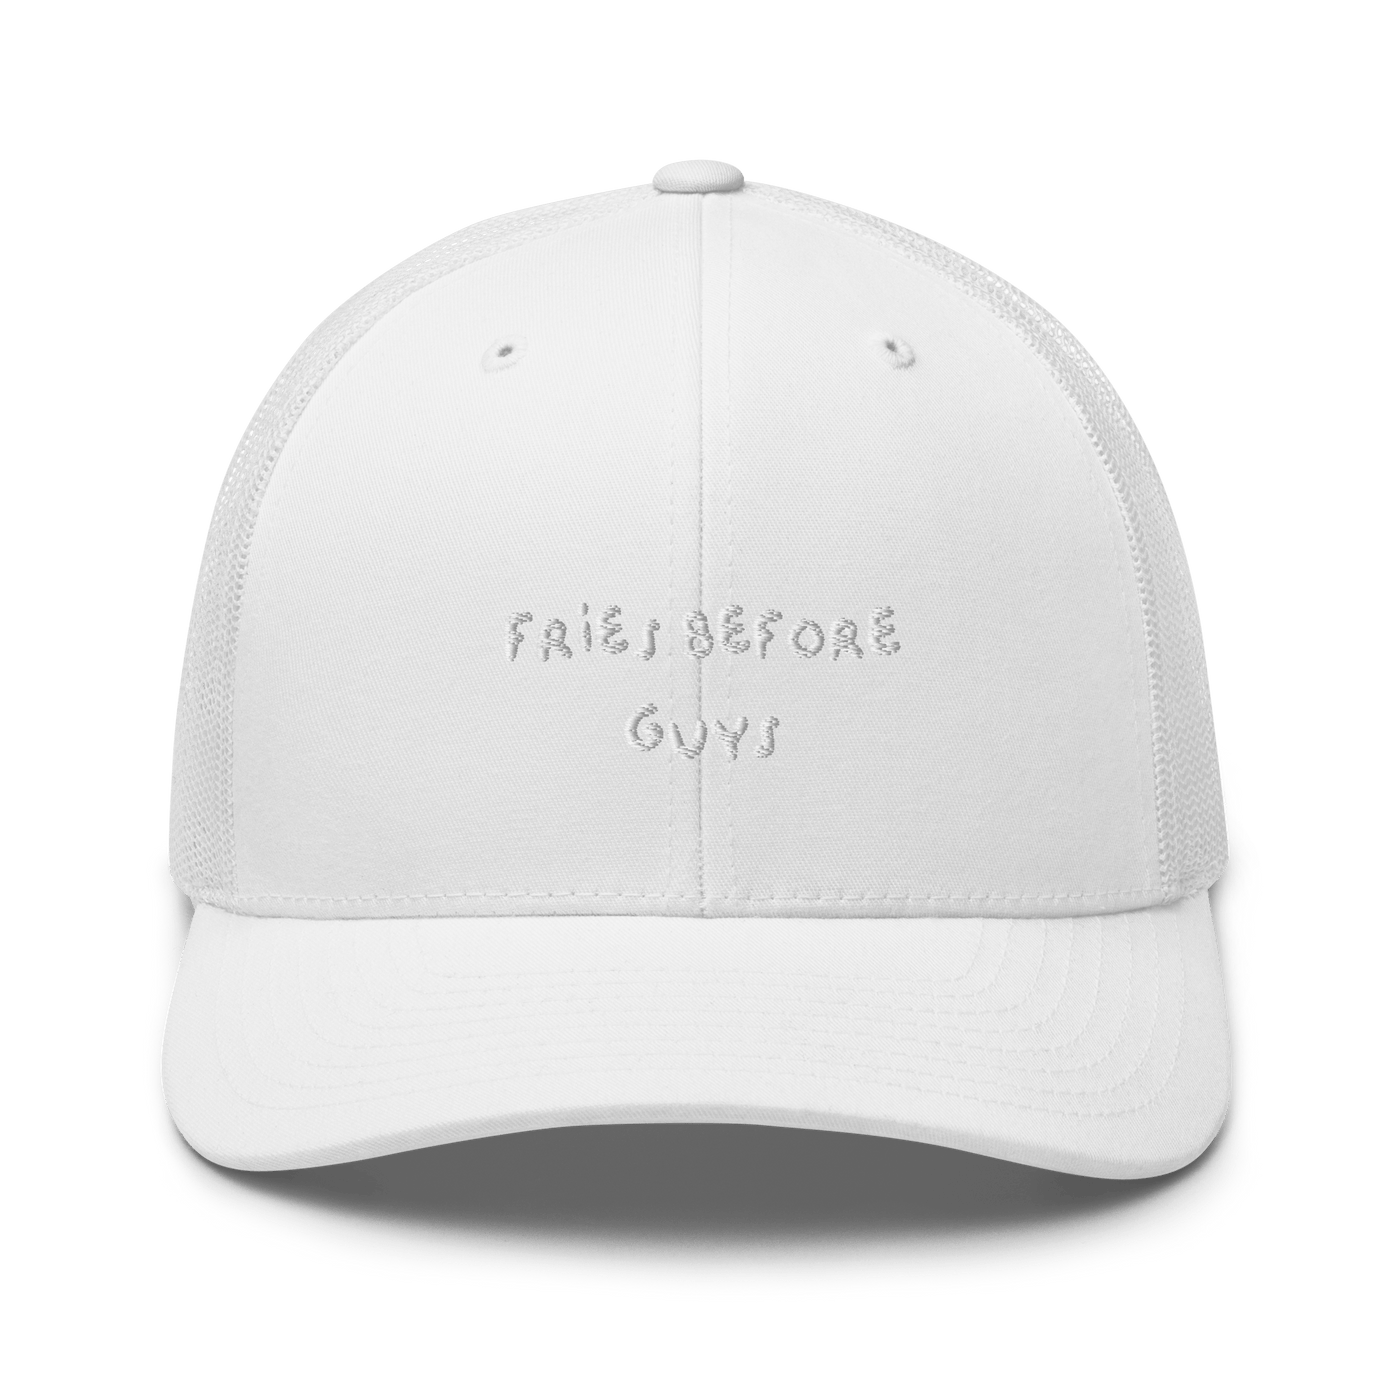 Fries Before Guys Trucker Cap - White - - Just Another Cap Store